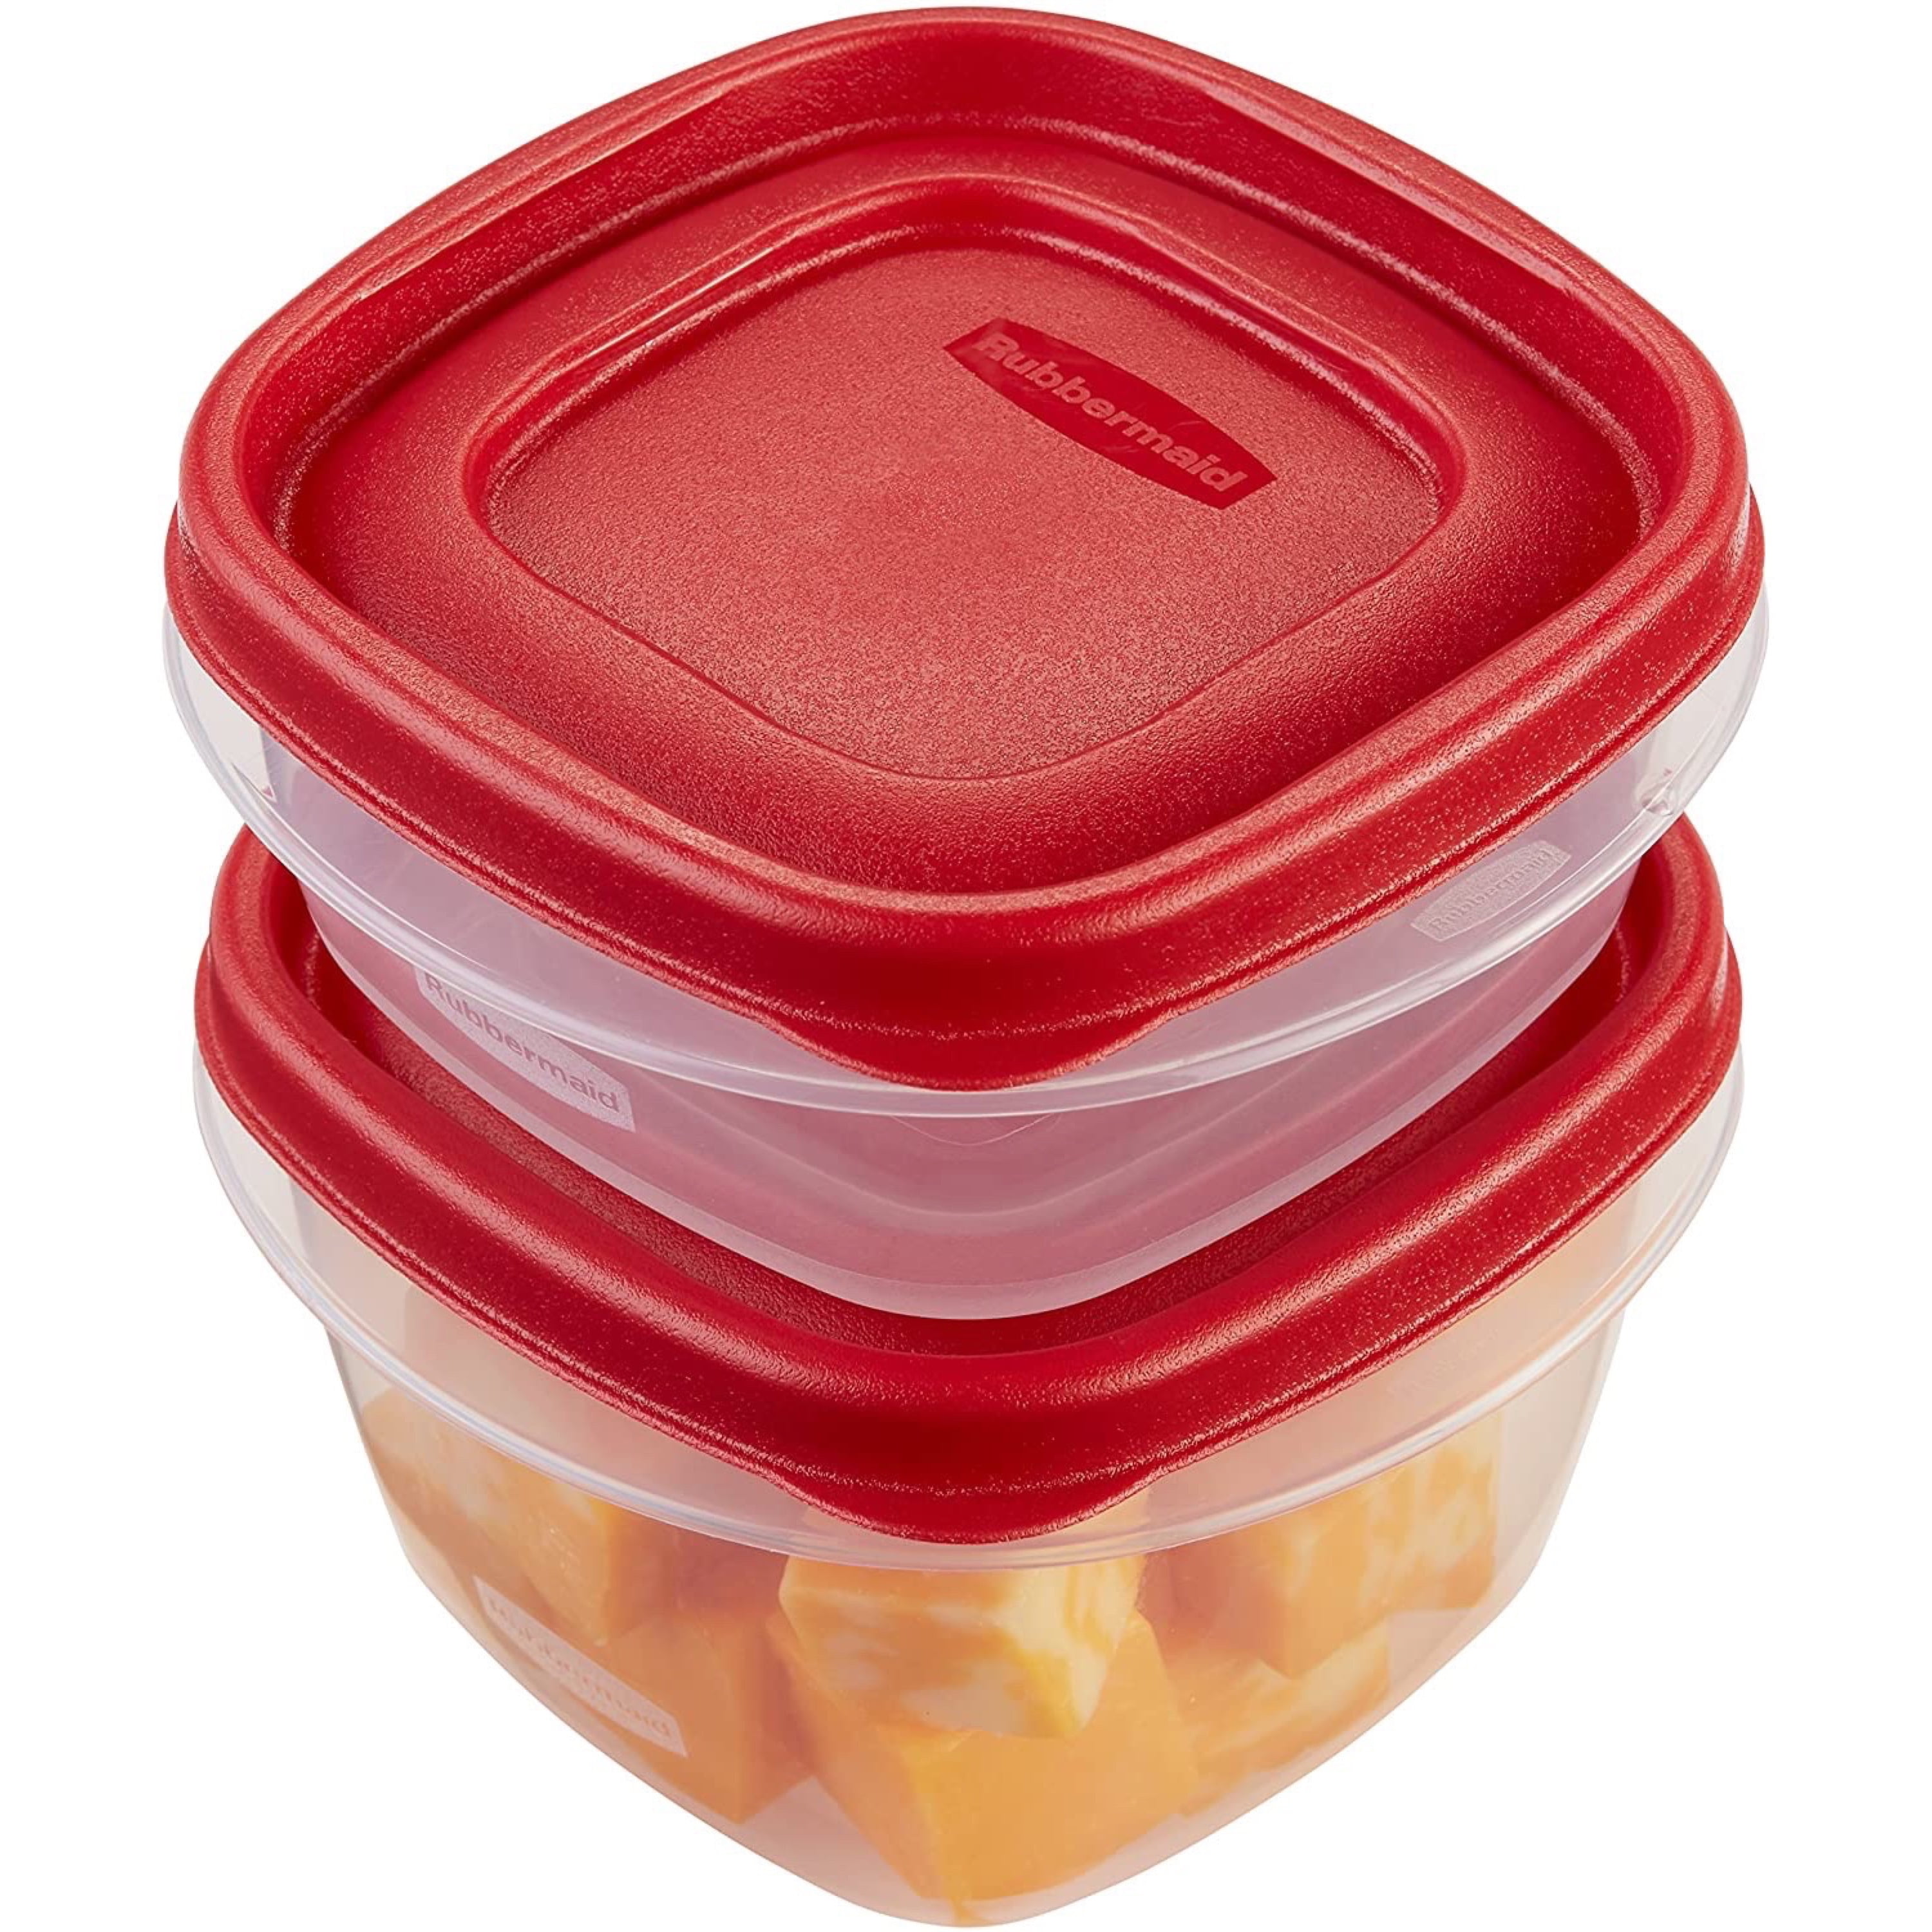 Rubbermaid Easy-Find Lids Food Storage Container Set - Red/Clear, 24 pc -  Fred Meyer